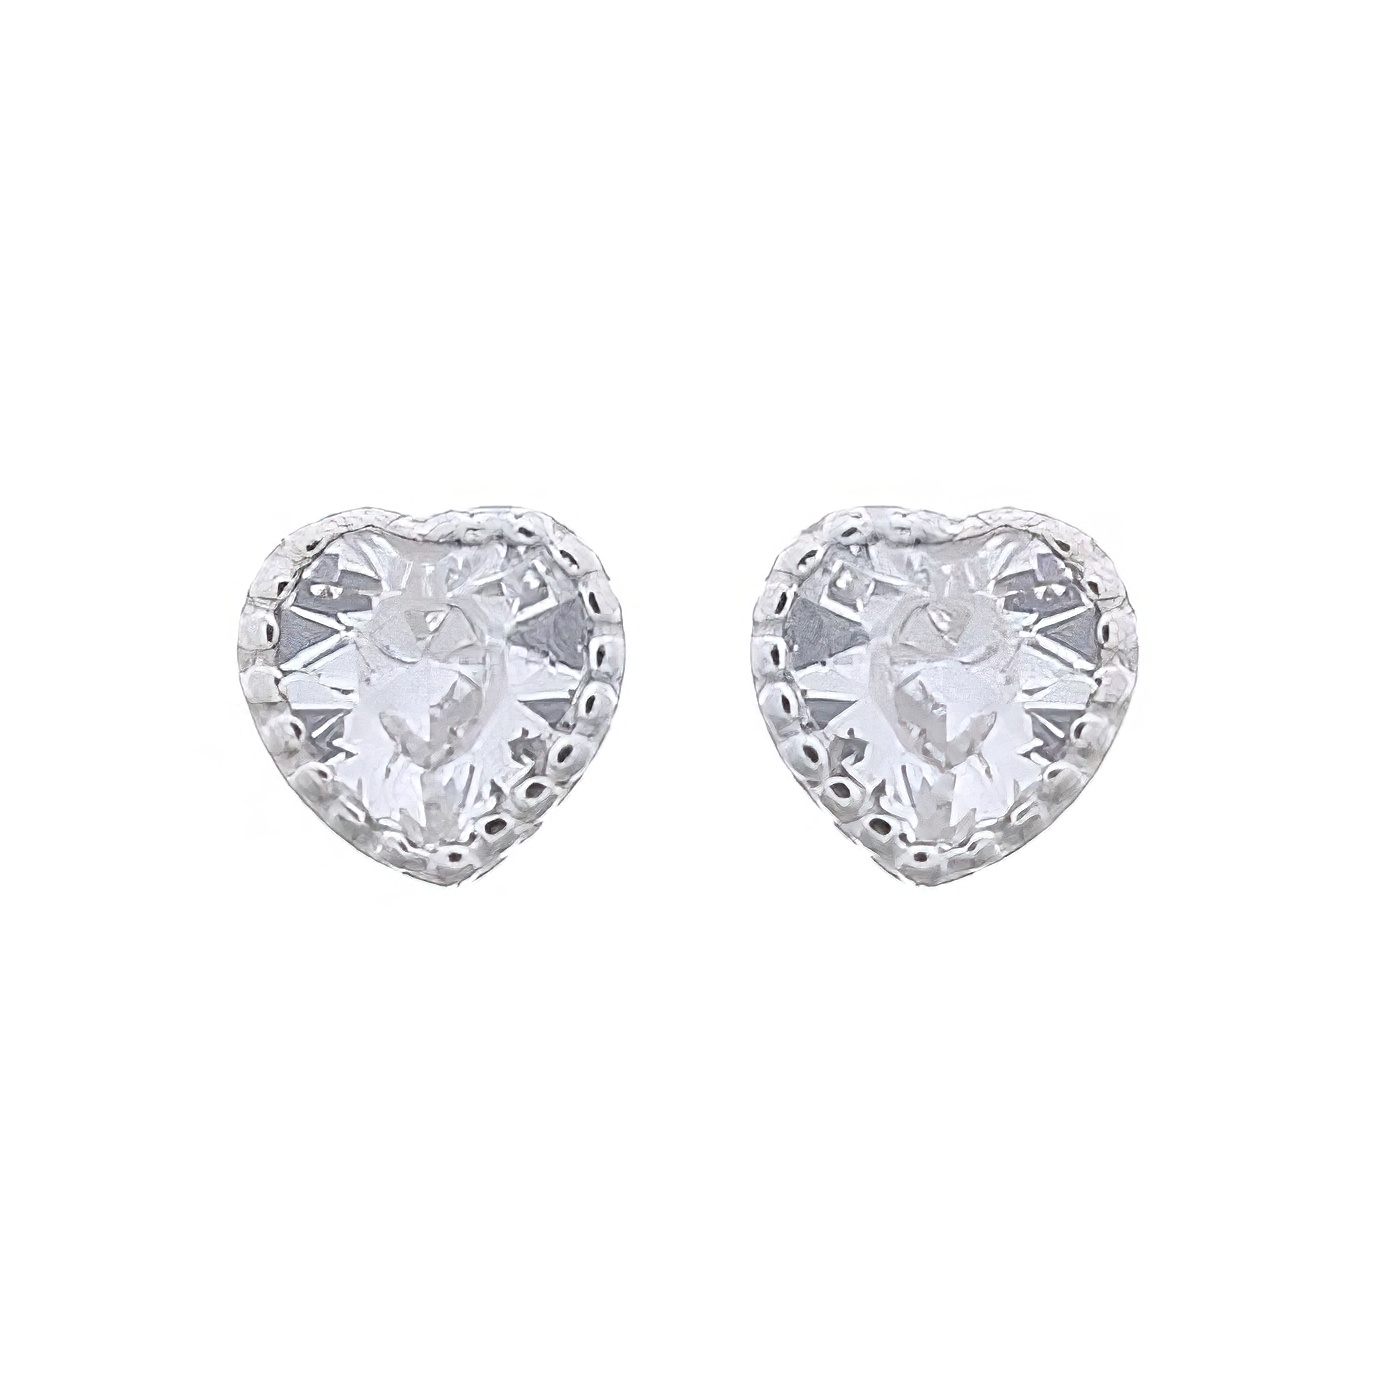 Tiny Delightful Heart With White CZ 925 Silver Stud Earrings by BeYindi 